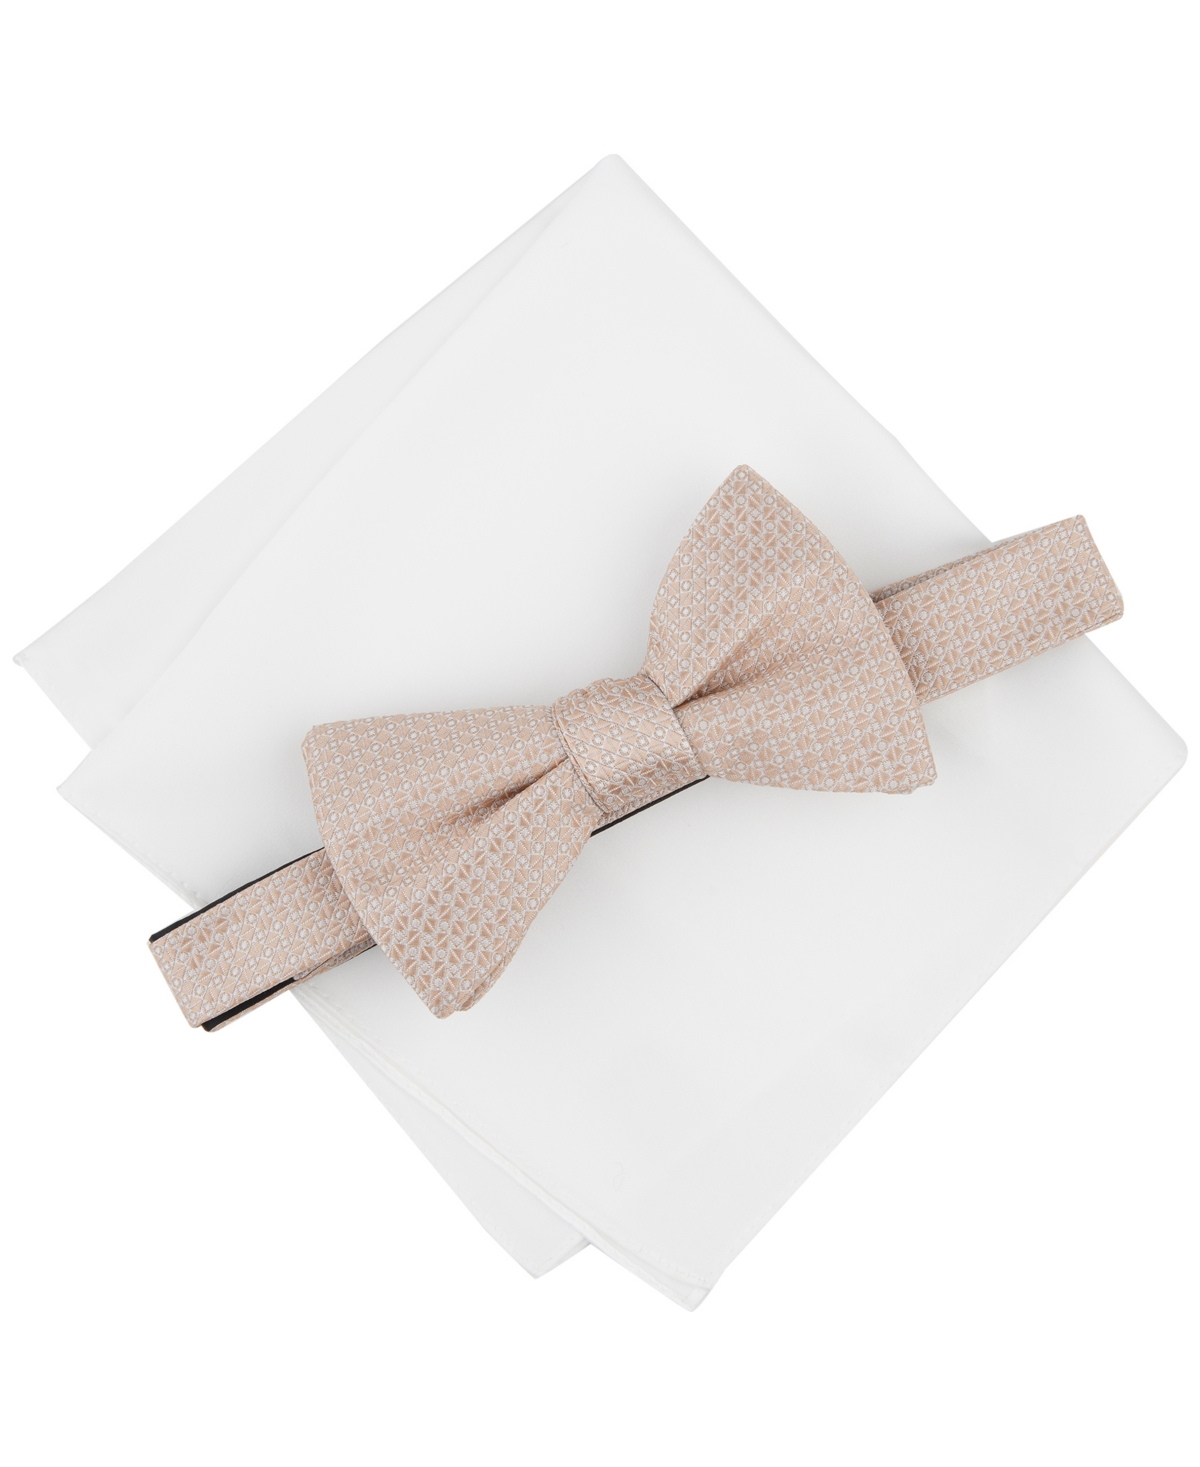 Men's Dawson Textured Bow Tie & Solid Pocket Square Set, Created for Macy's - Taupe